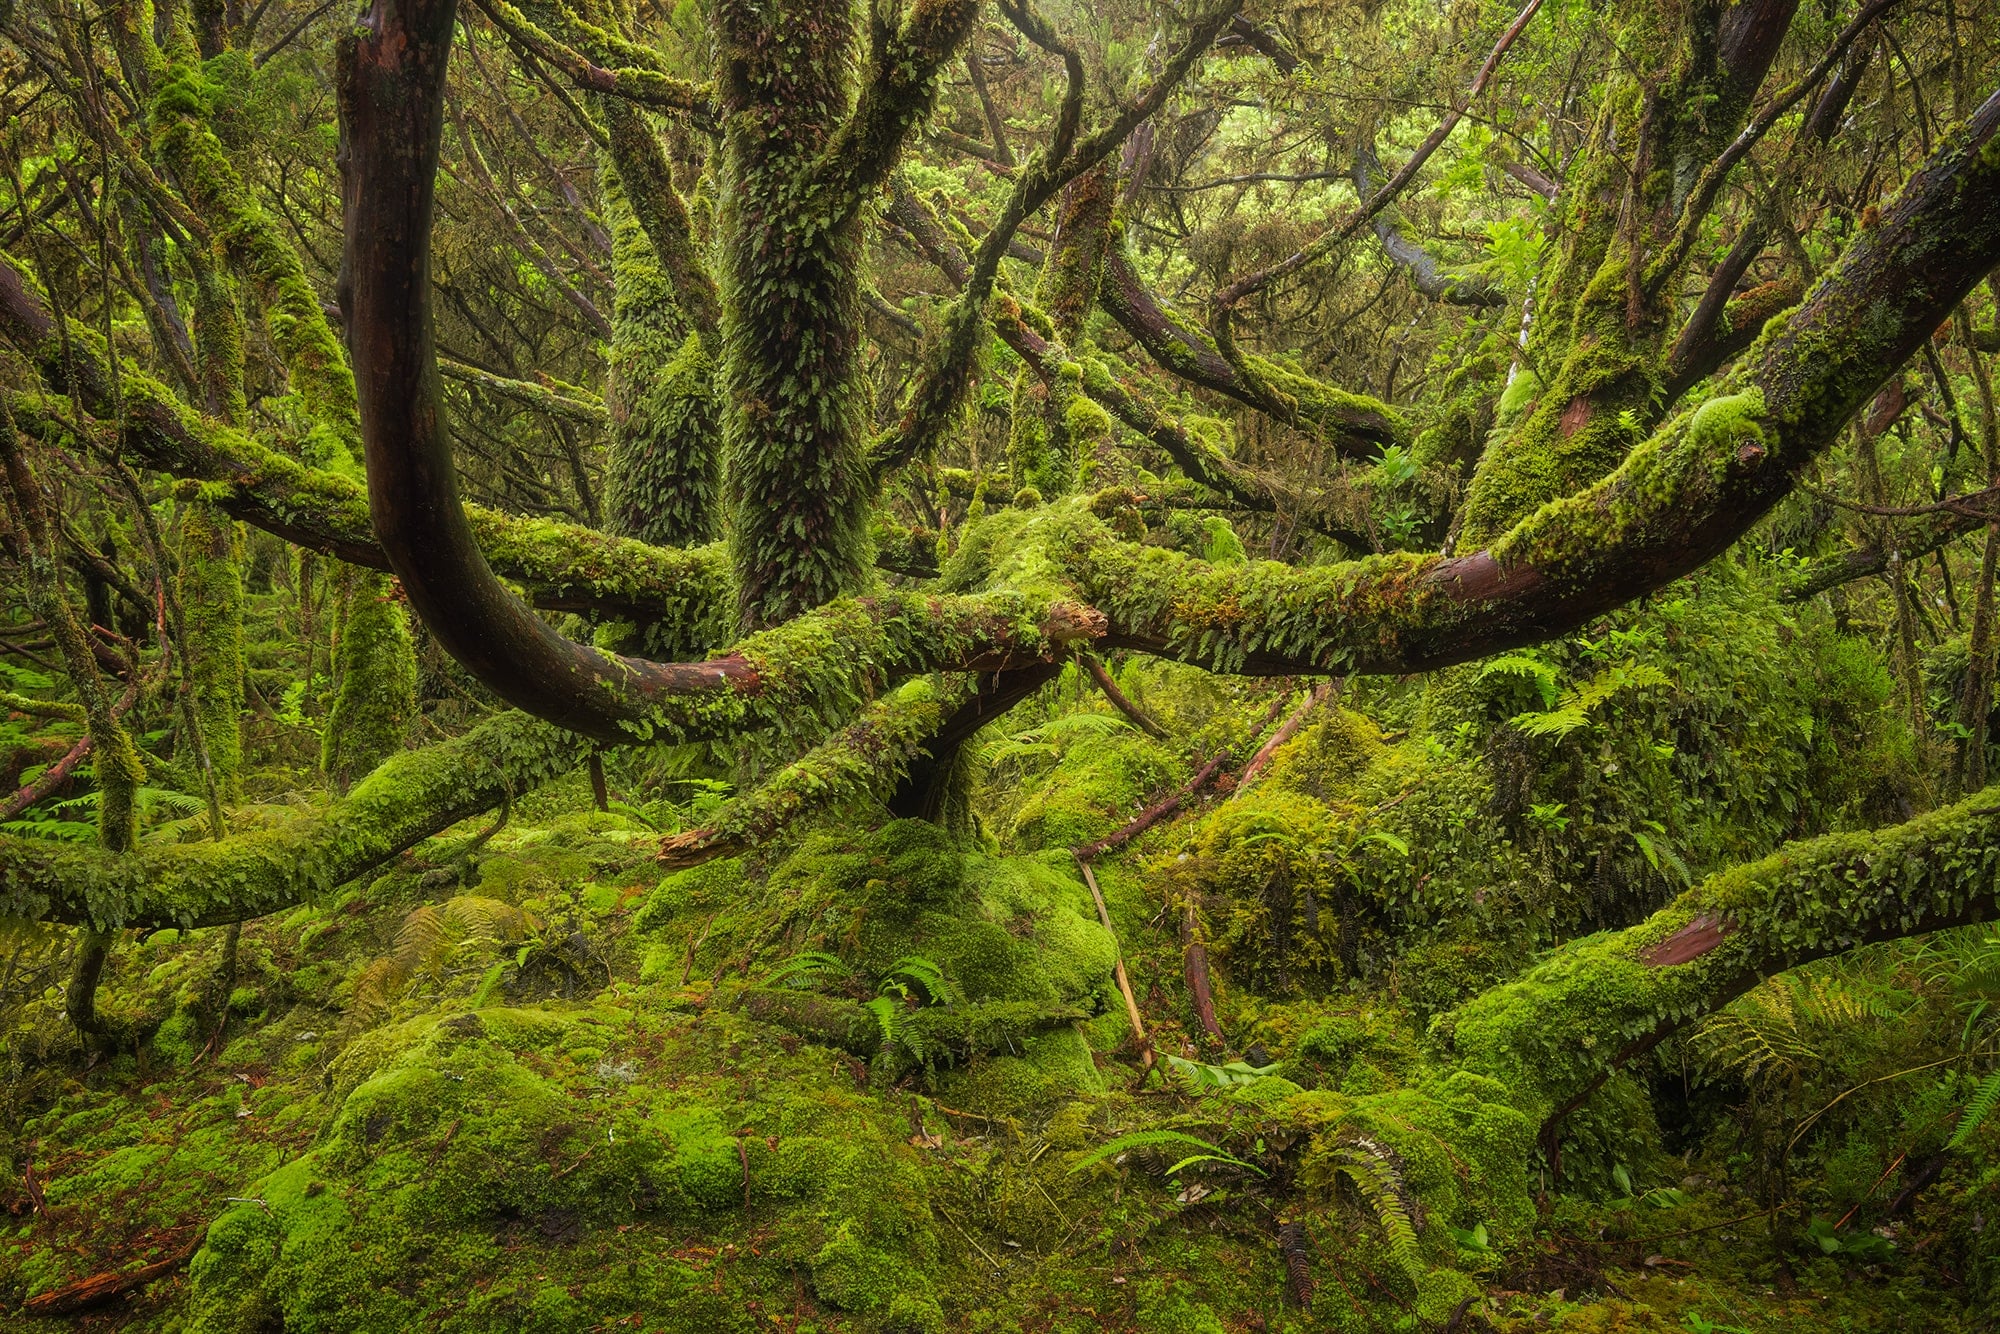 Unveil the timeless charm of Terceira Island in the Azores with this captivating photograph featuring an ancient tree adorned with lush moss in the heart of the black forest. Expertly captured, this stunning landscape photography showcases the rich natural beauty and serene ambiance of Terceira's unique ecosystem. Immerse yourself in the enchanting tranquility of this pristine island destination as you explore the hidden gems of its mystical forests.